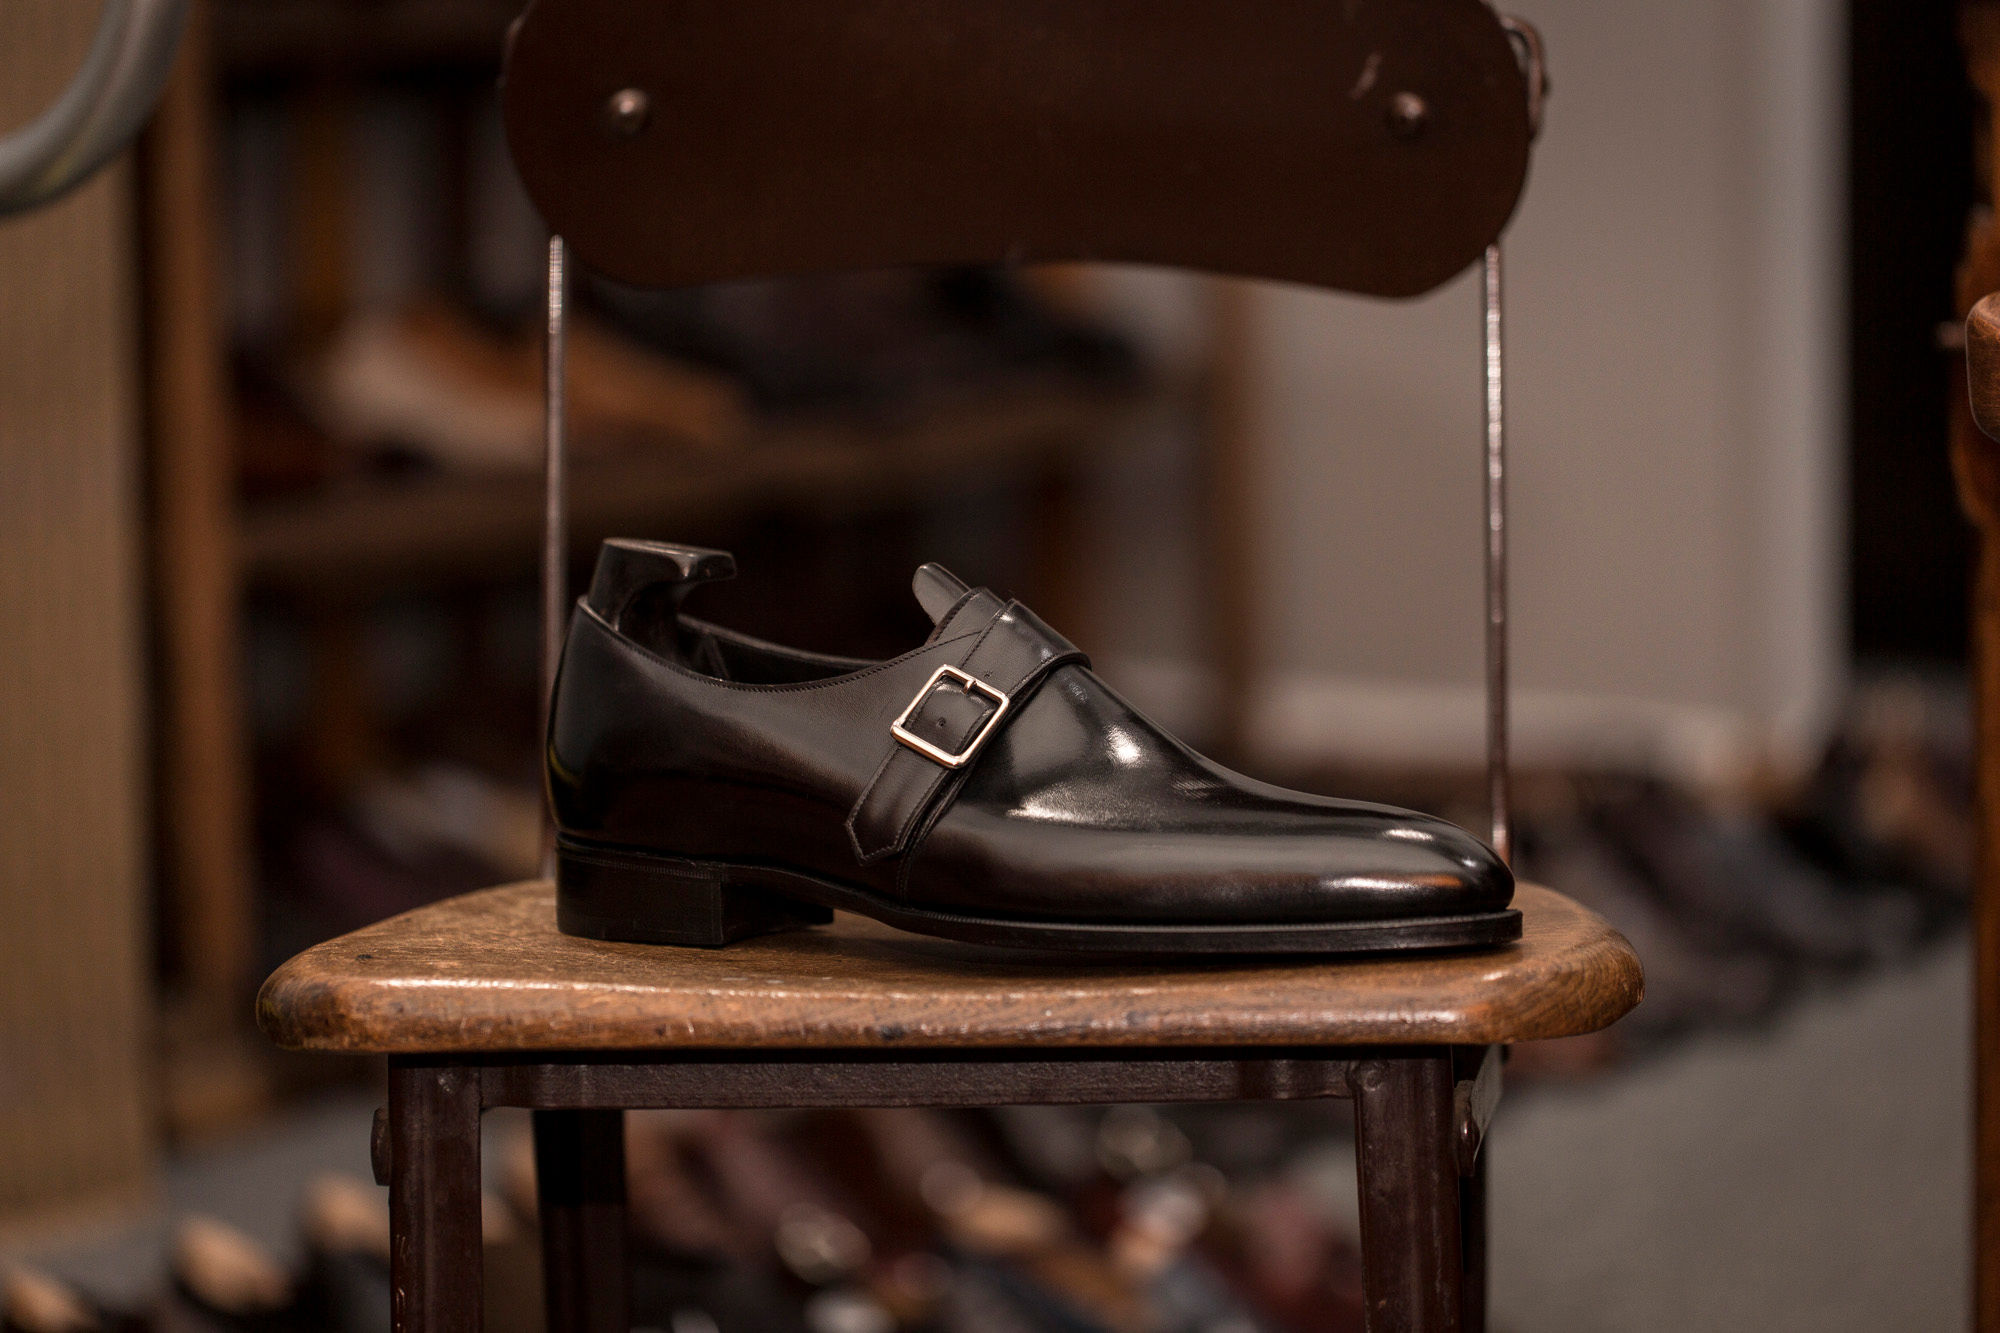 What you need to know before buying leather shoes, according to a Savile Row shoemaker